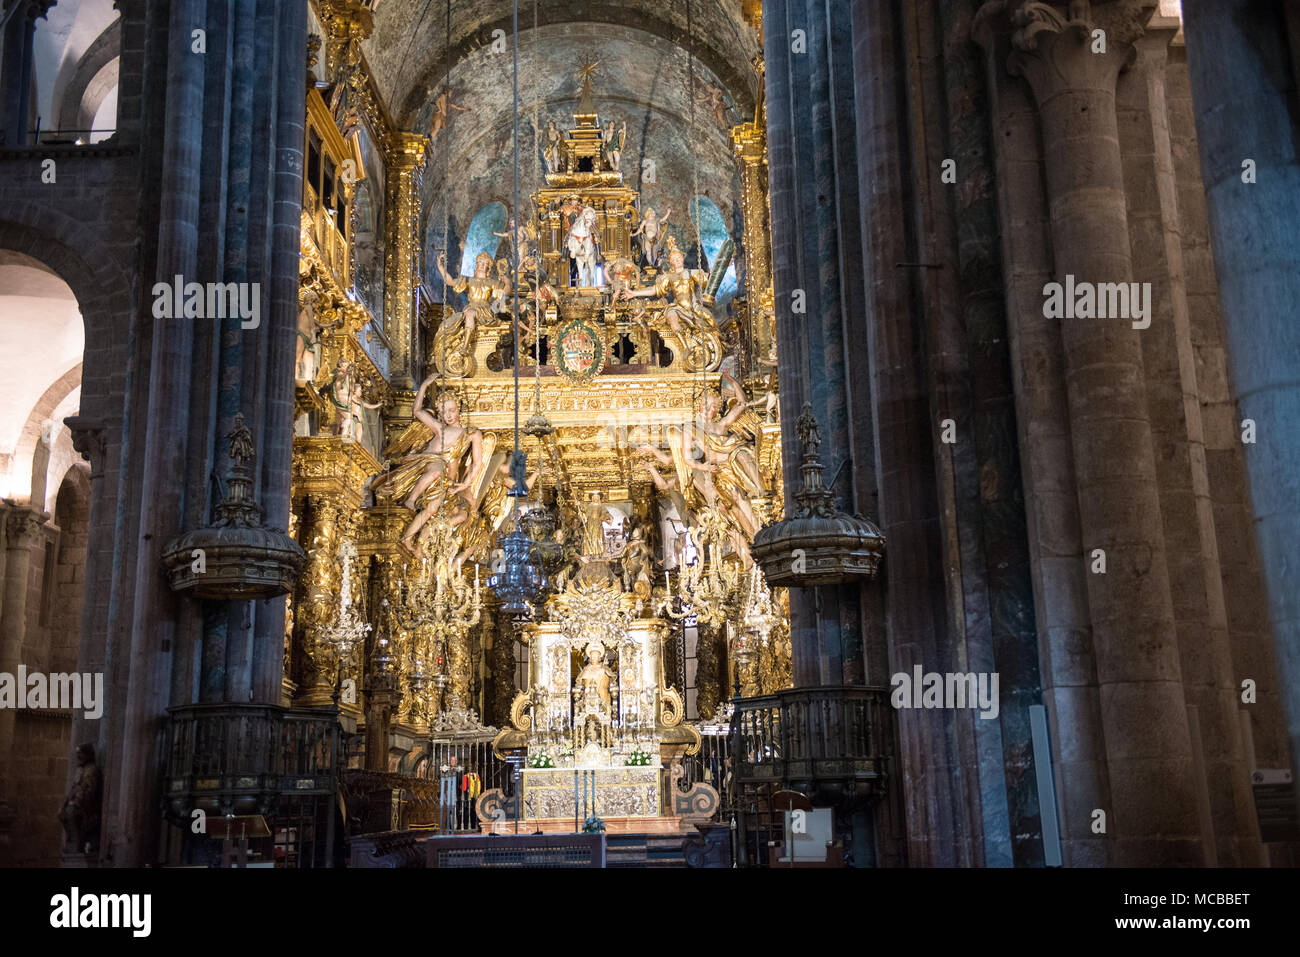 Altar of the cathedral of Santiago de Compostela Stock Photo